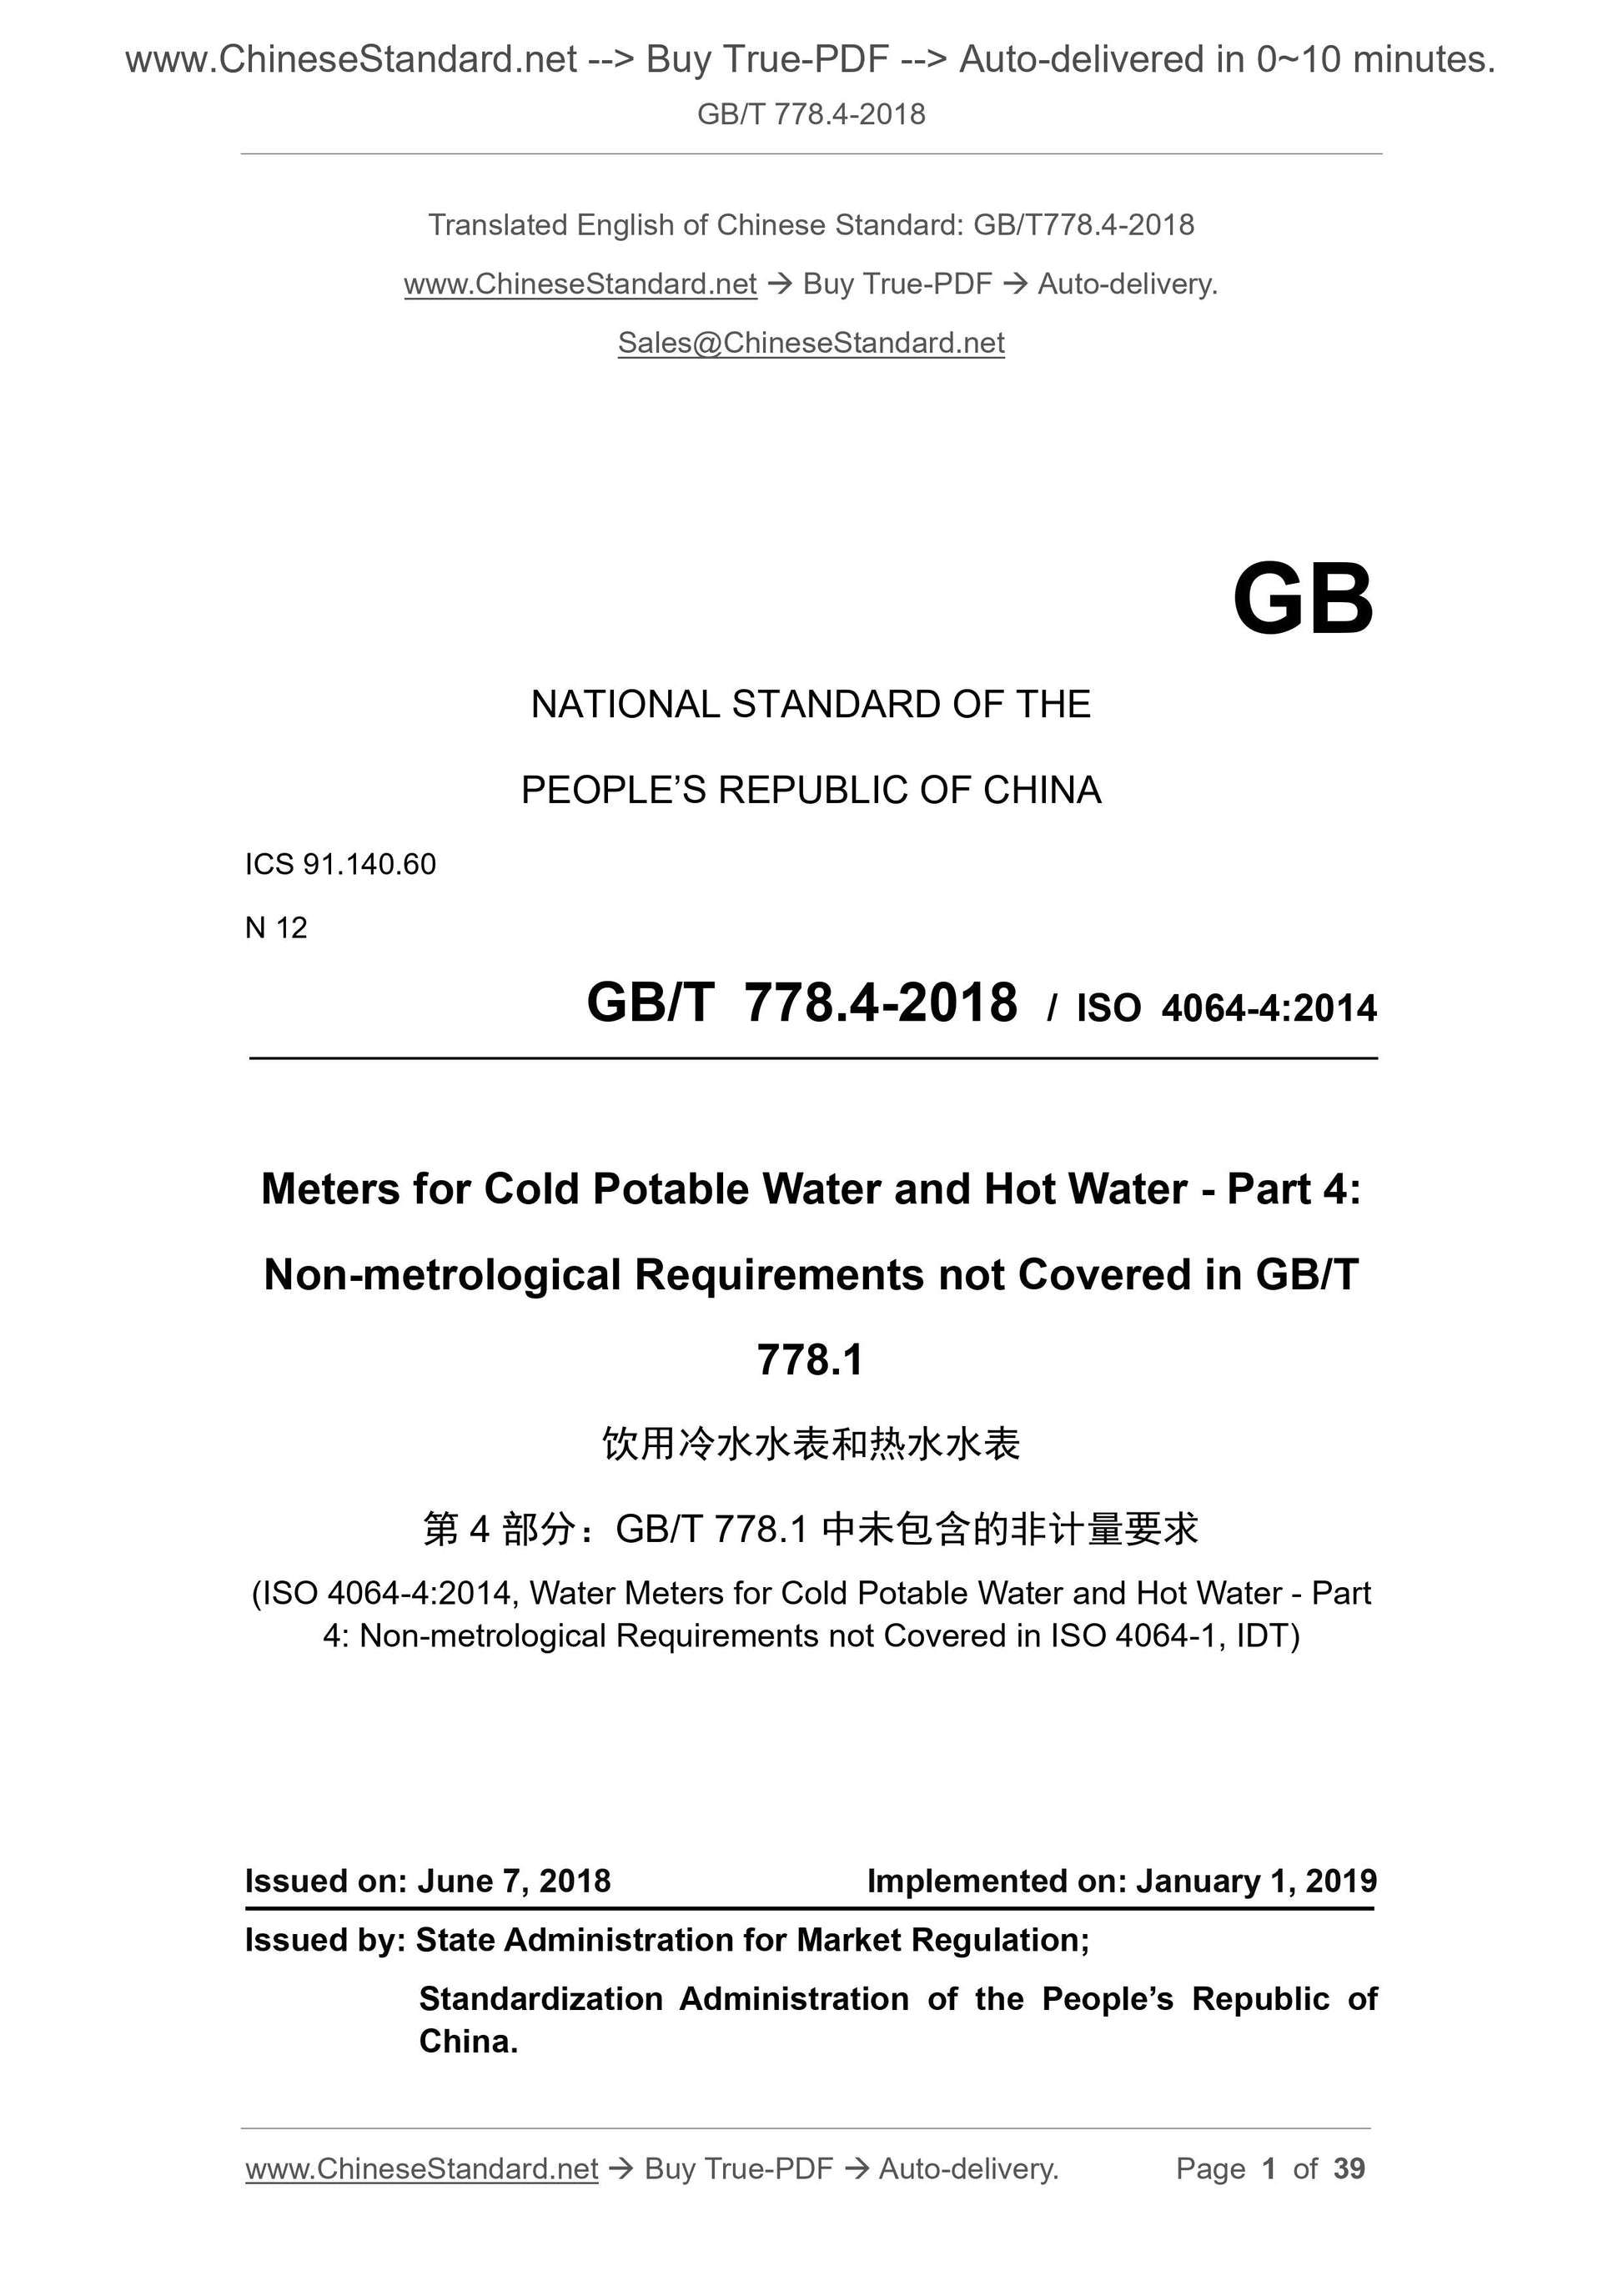 GB/T 778.4-2018 Page 1